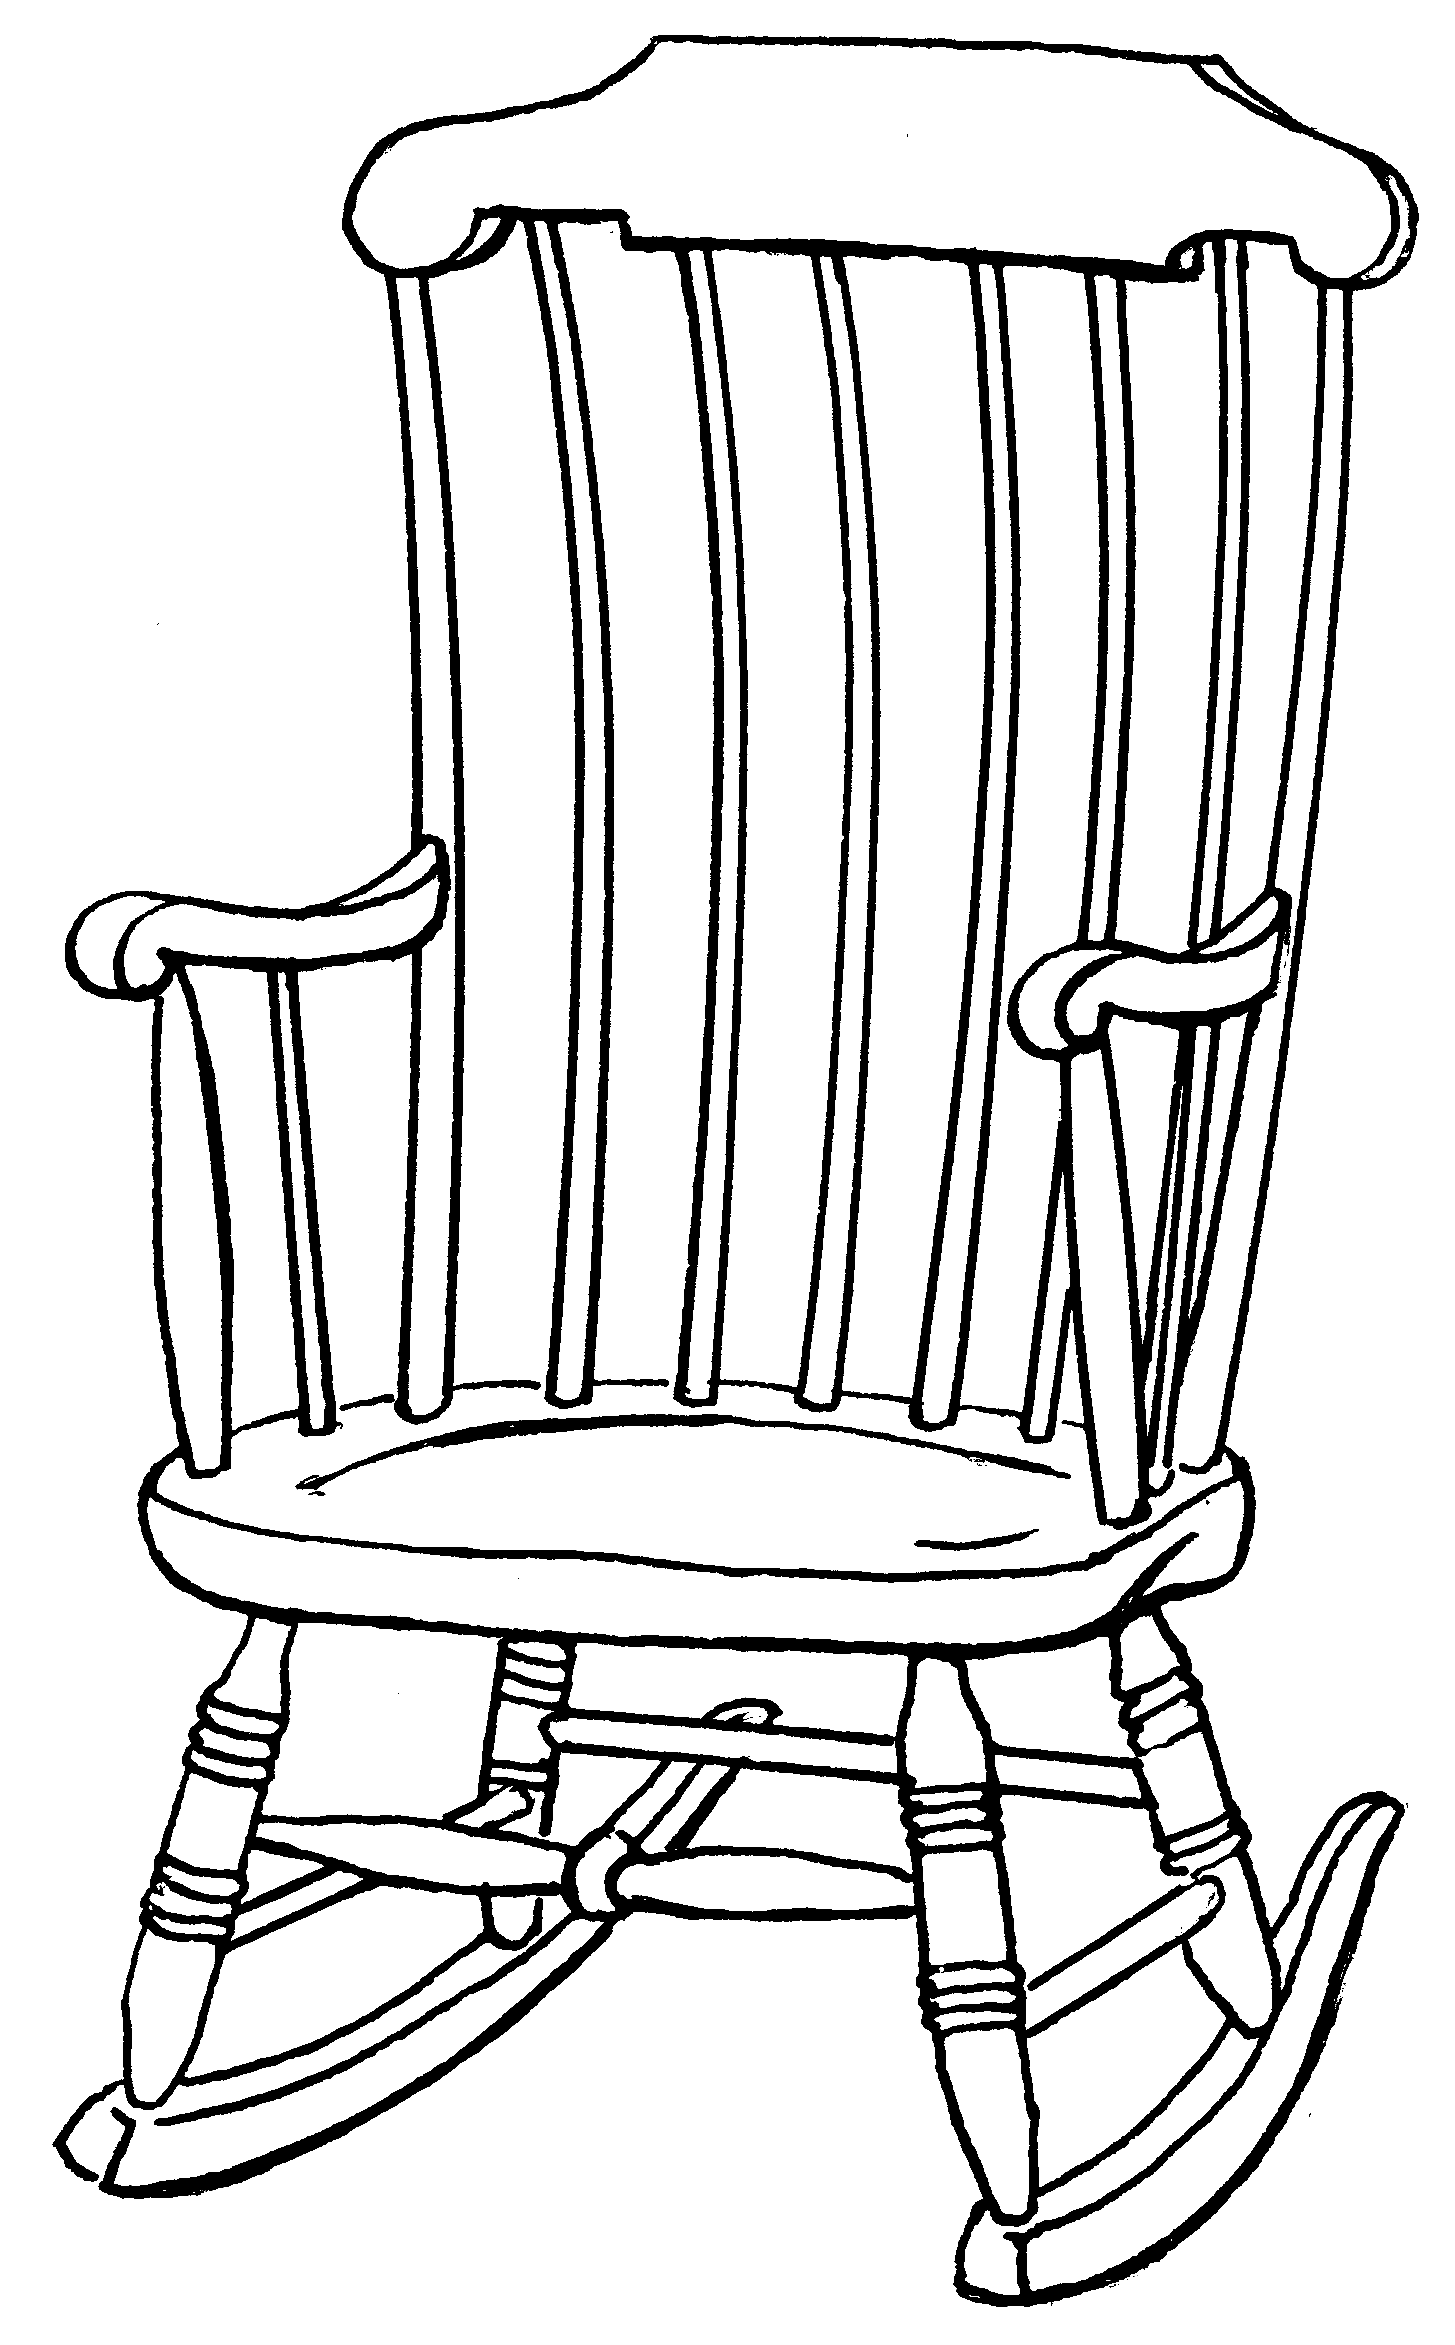 Outline Drawings On Chair - Clipart library